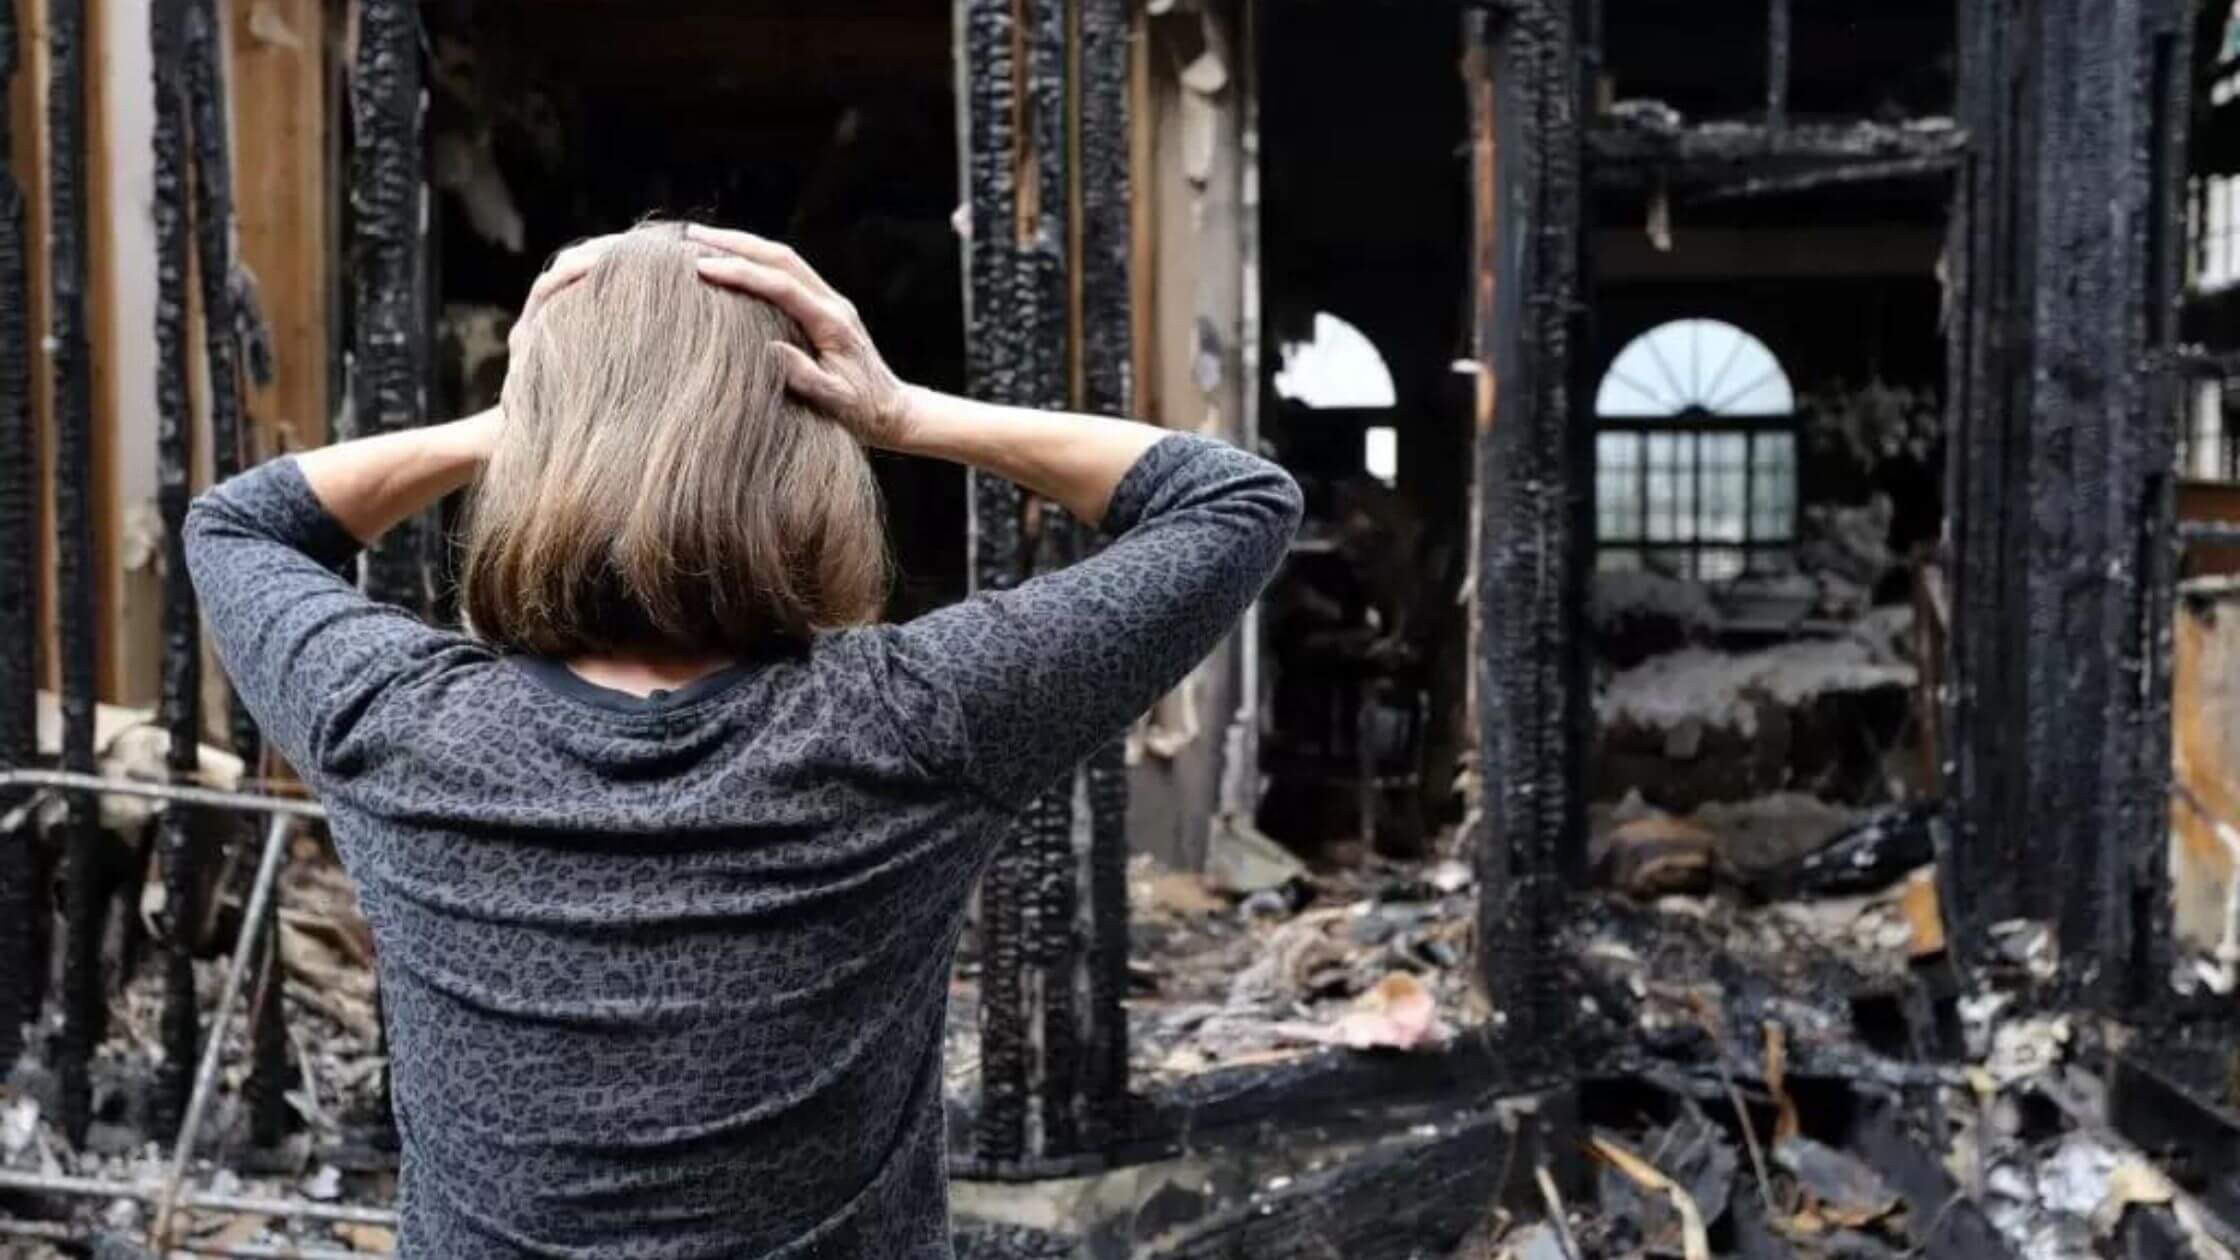 Finding Emotional Support After a Devastating House Fire